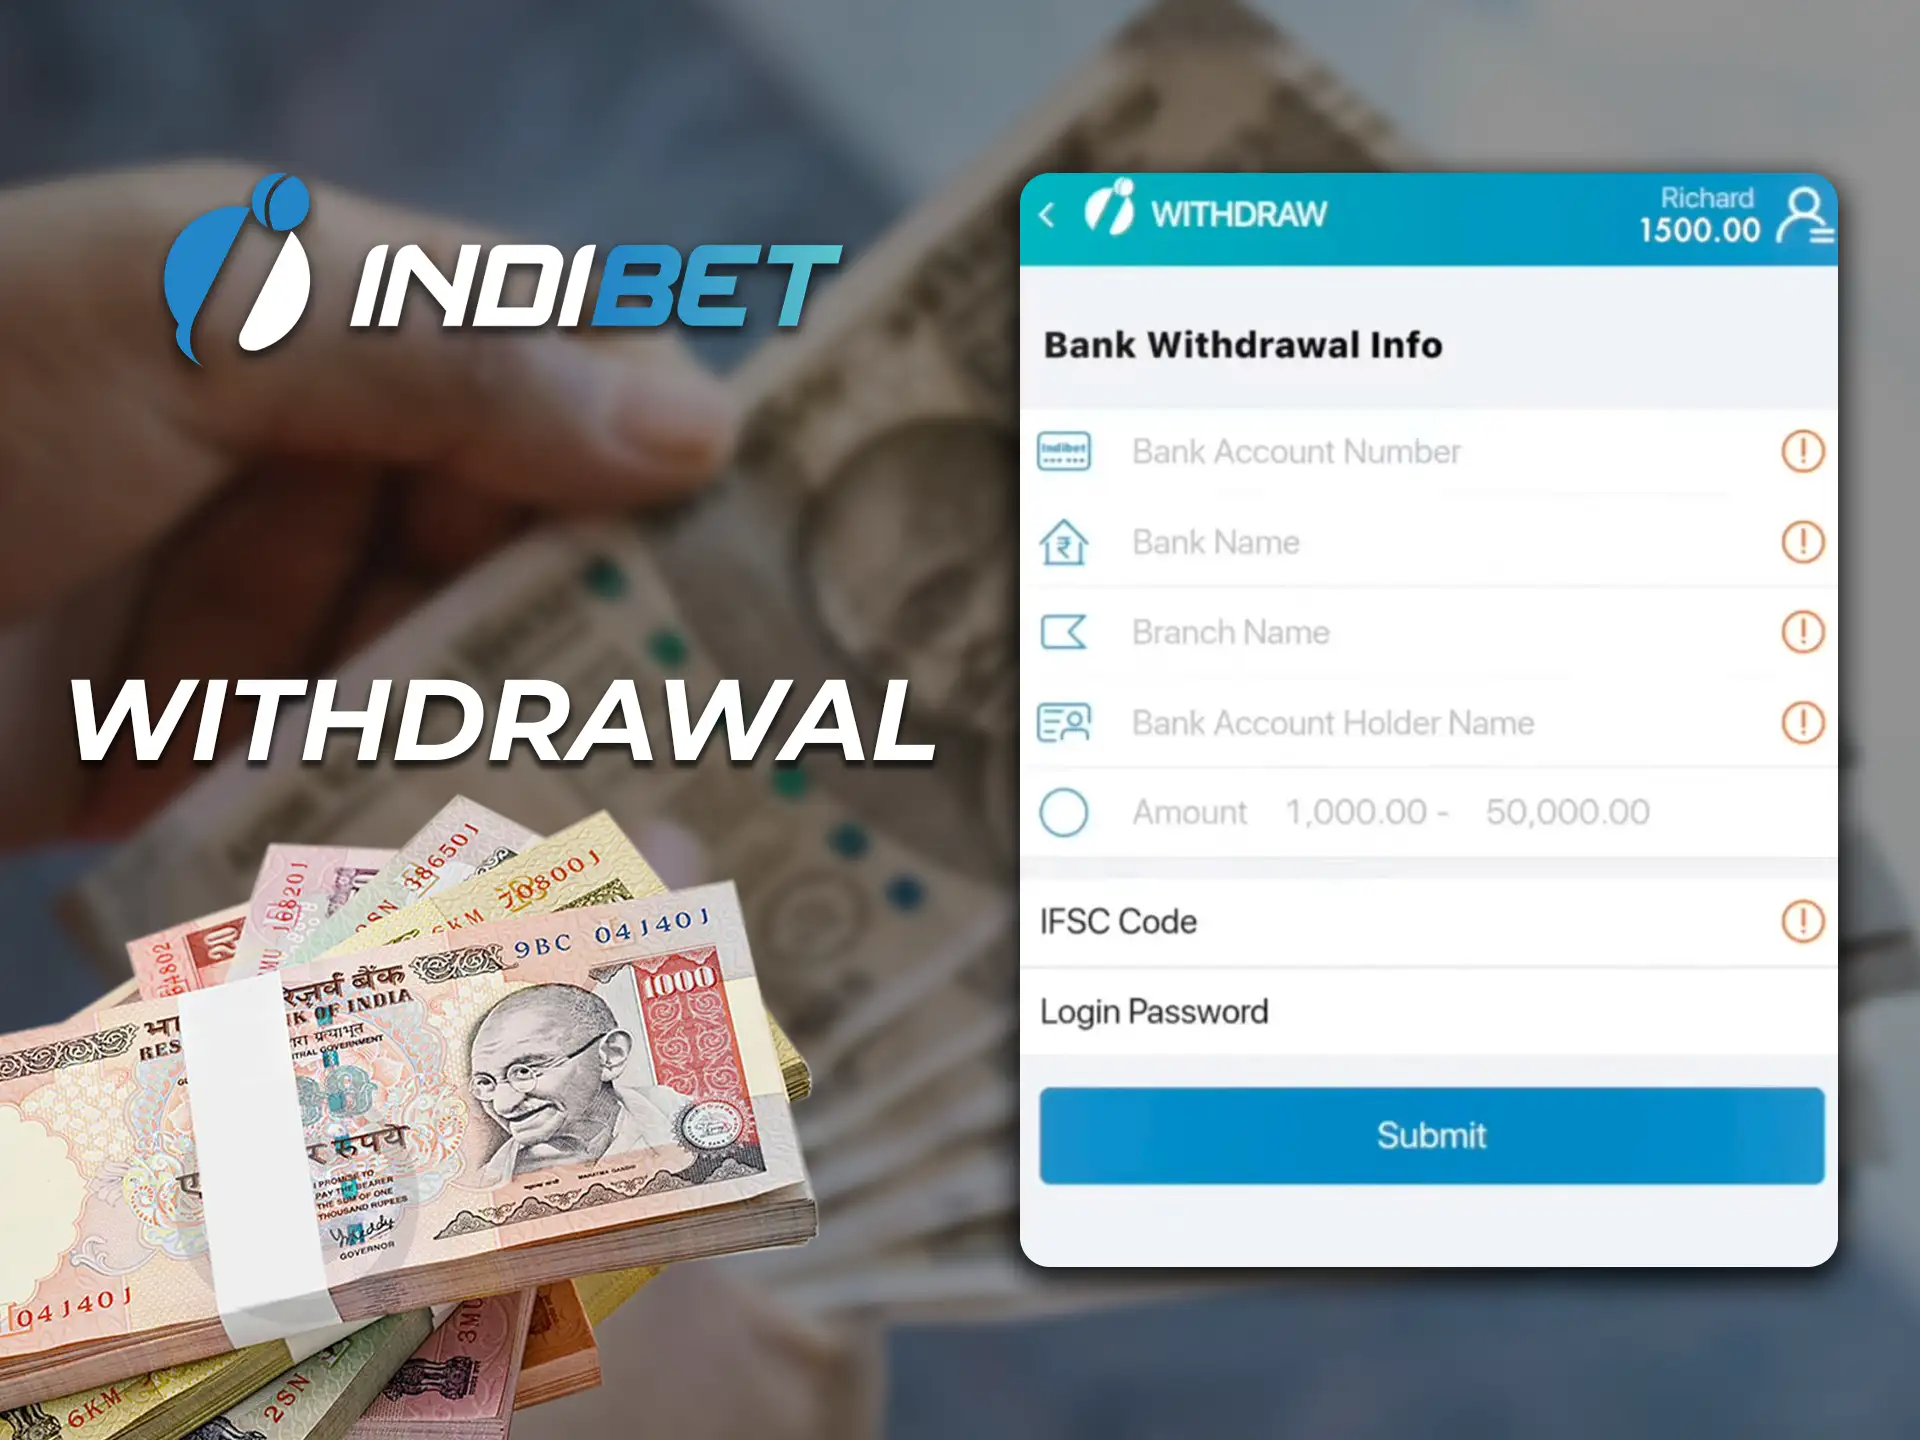 Click on the withdrawal button, select one of the methods and specify the amount.